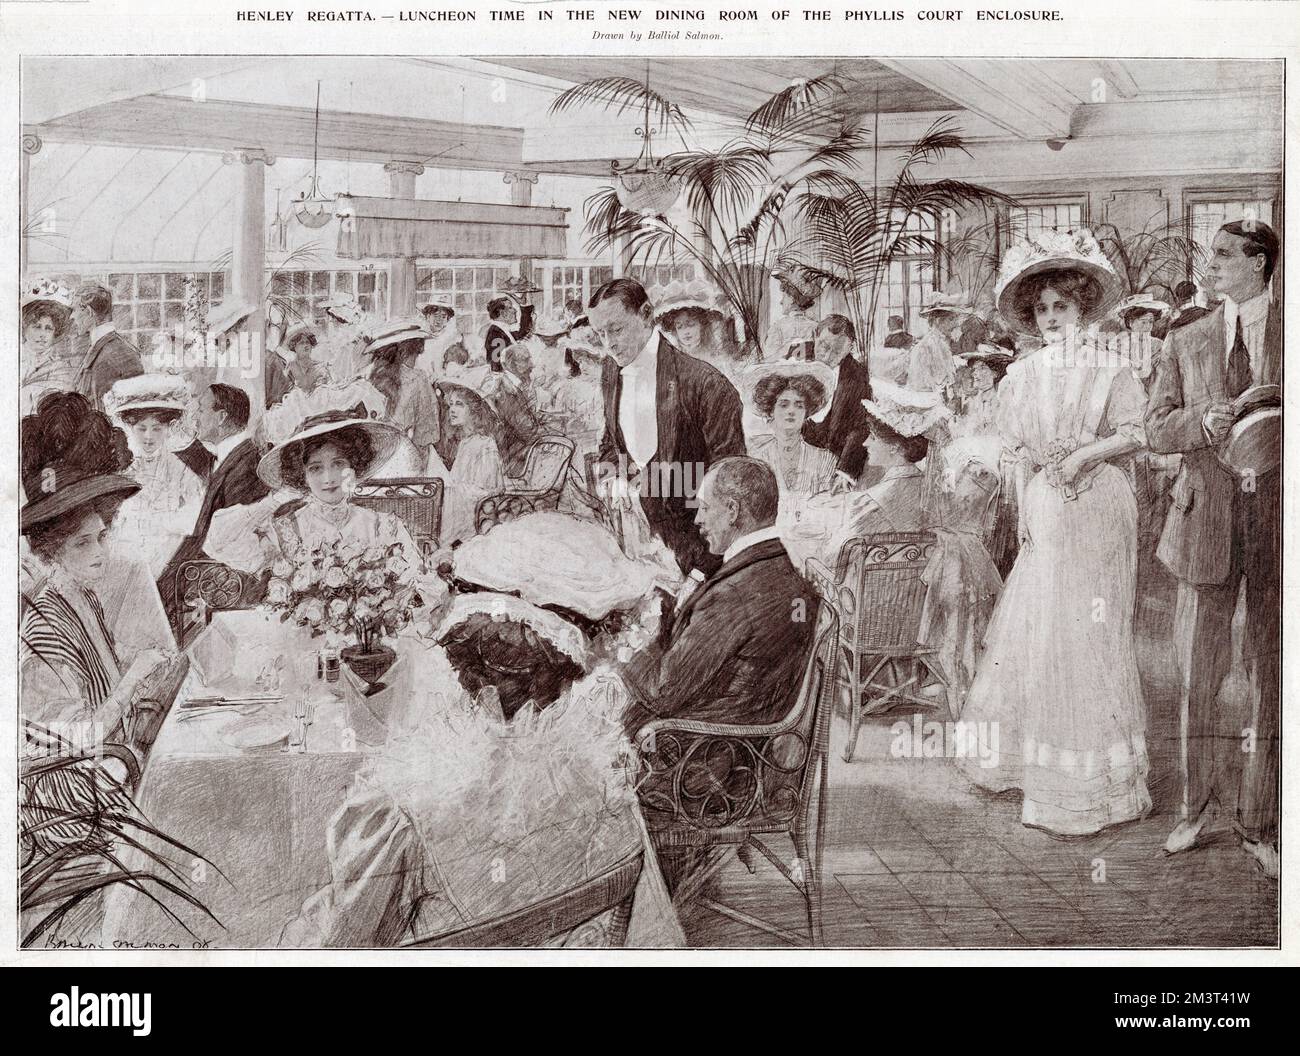 Lunchtime in the Phyllis Court enclosure during Henley Regatta. Phyllis Court was an exclusive riverside club offering dining, dancing and sports facilities. Its viewing platform had the very best seats for seeing Henley Regatta.     Date: 1908 Stock Photo